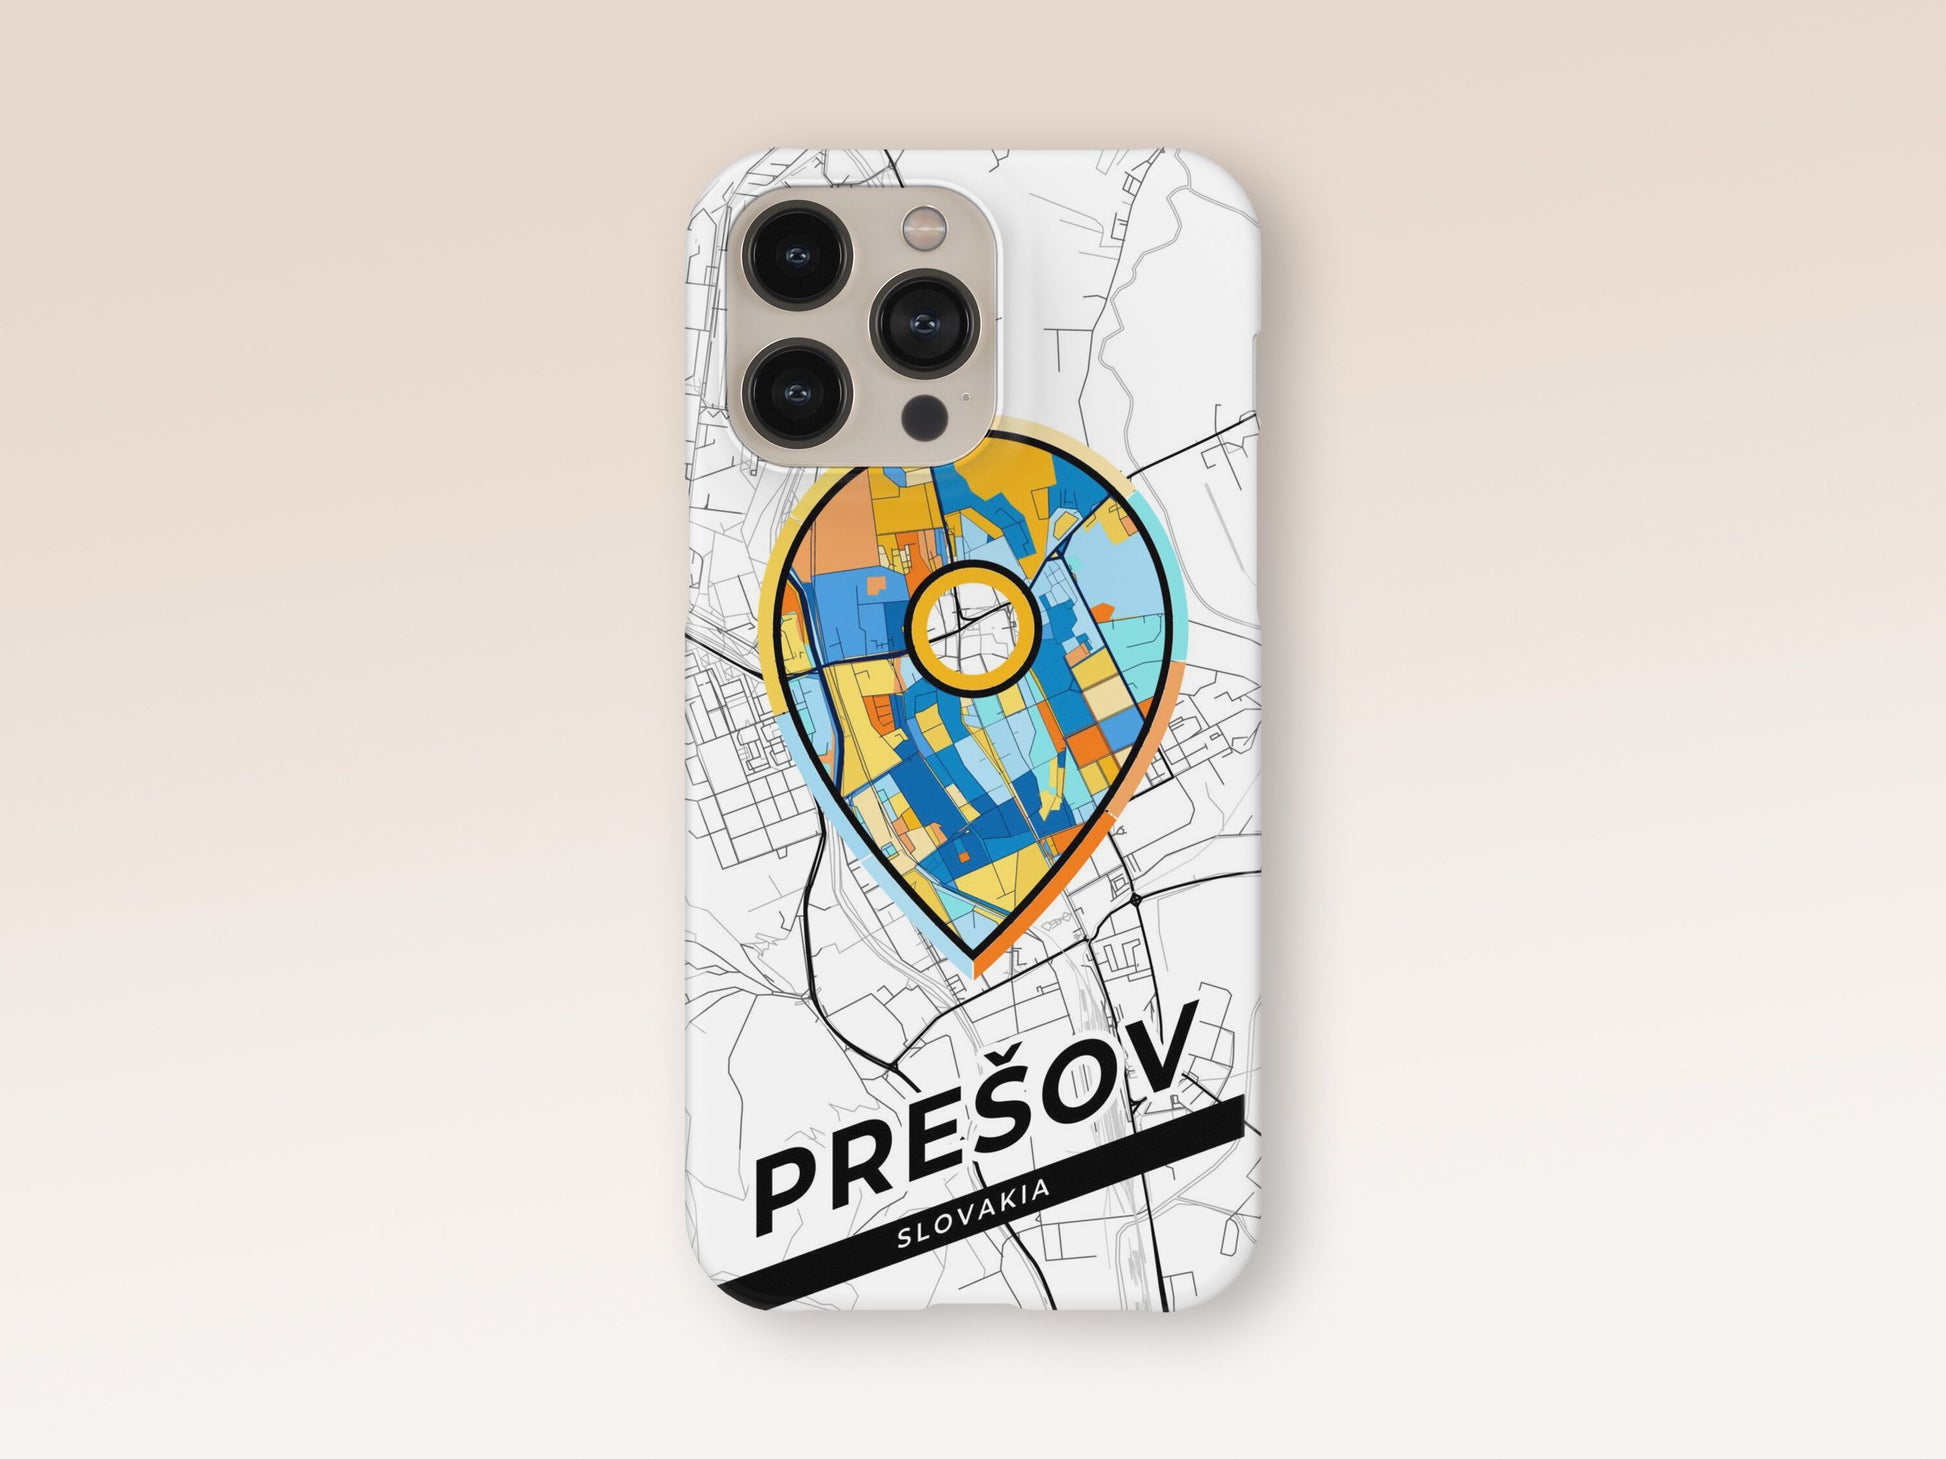 Prešov Slovakia slim phone case with colorful icon. Birthday, wedding or housewarming gift. Couple match cases. 1